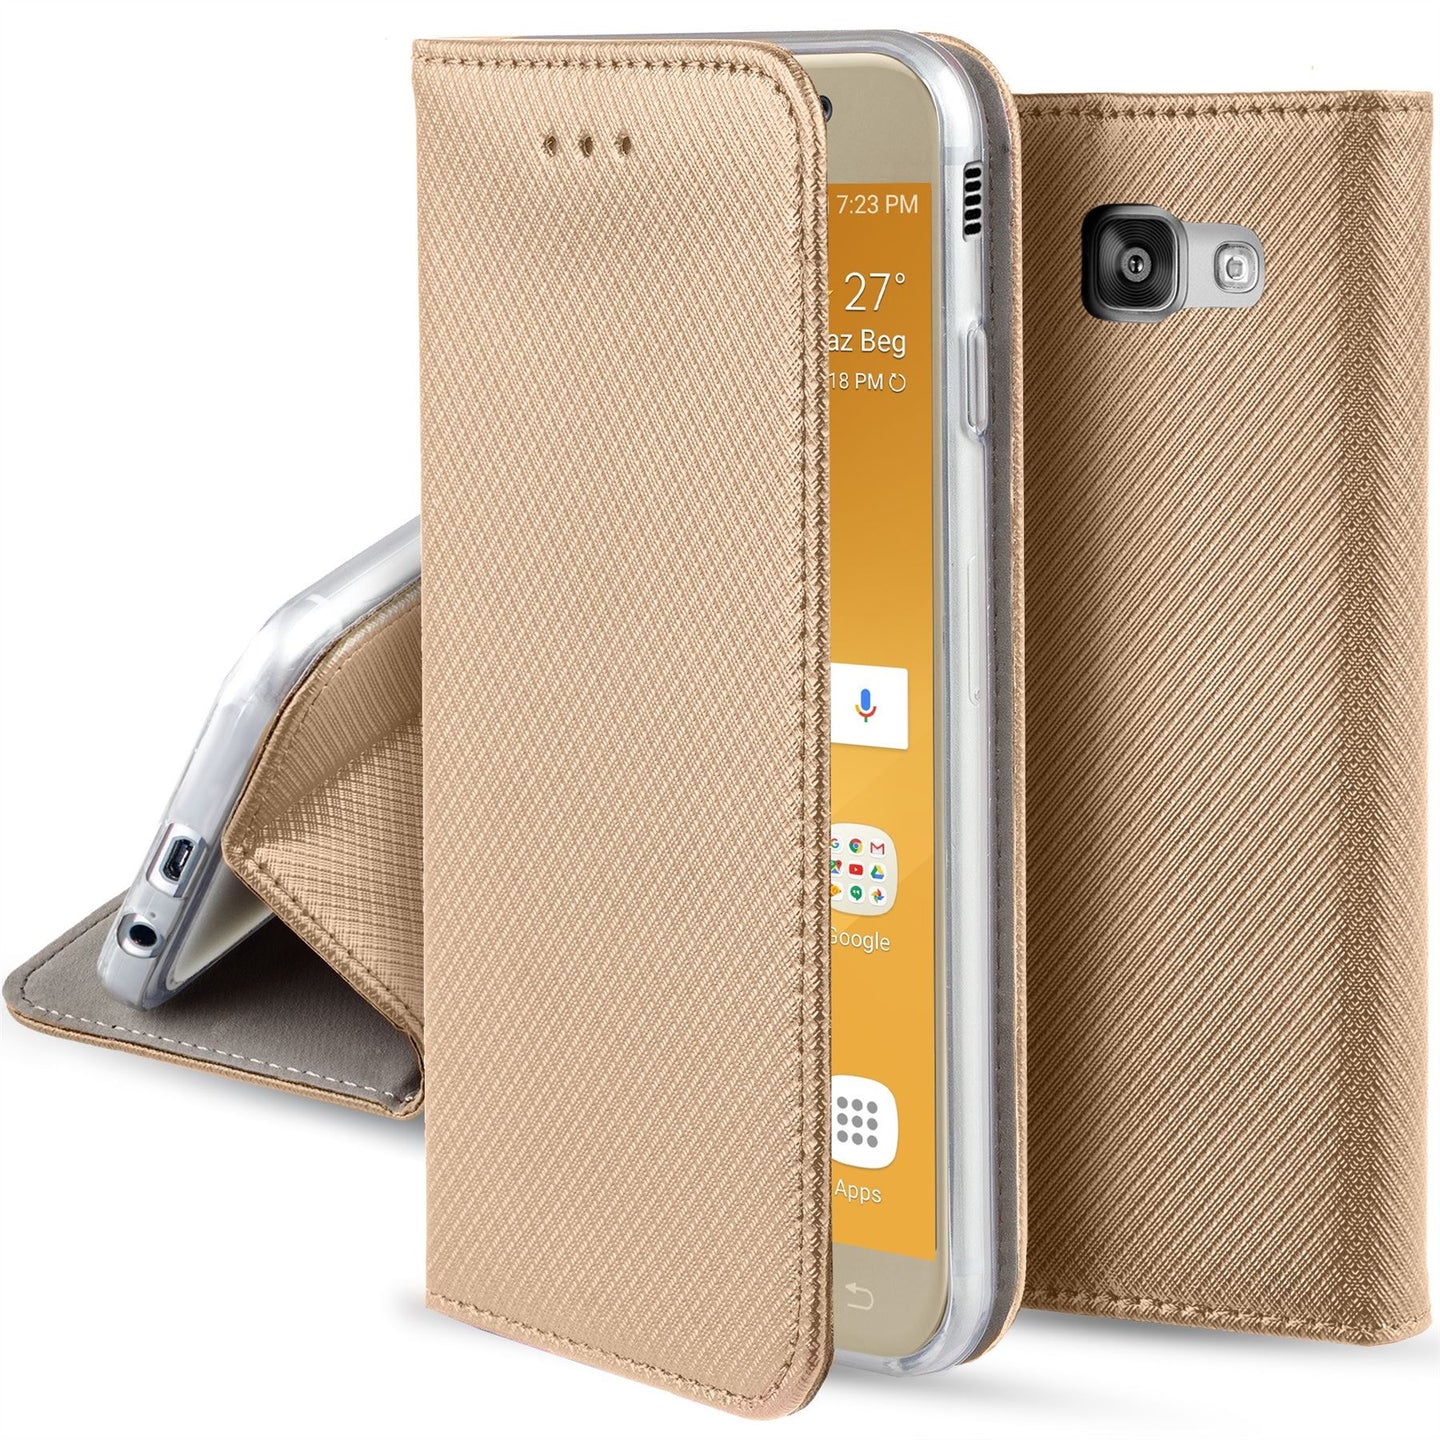 Moozy Case Flip Cover for Samsung A5 2017, Gold - Smart Magnetic Flip Case with Card Holder and Stand